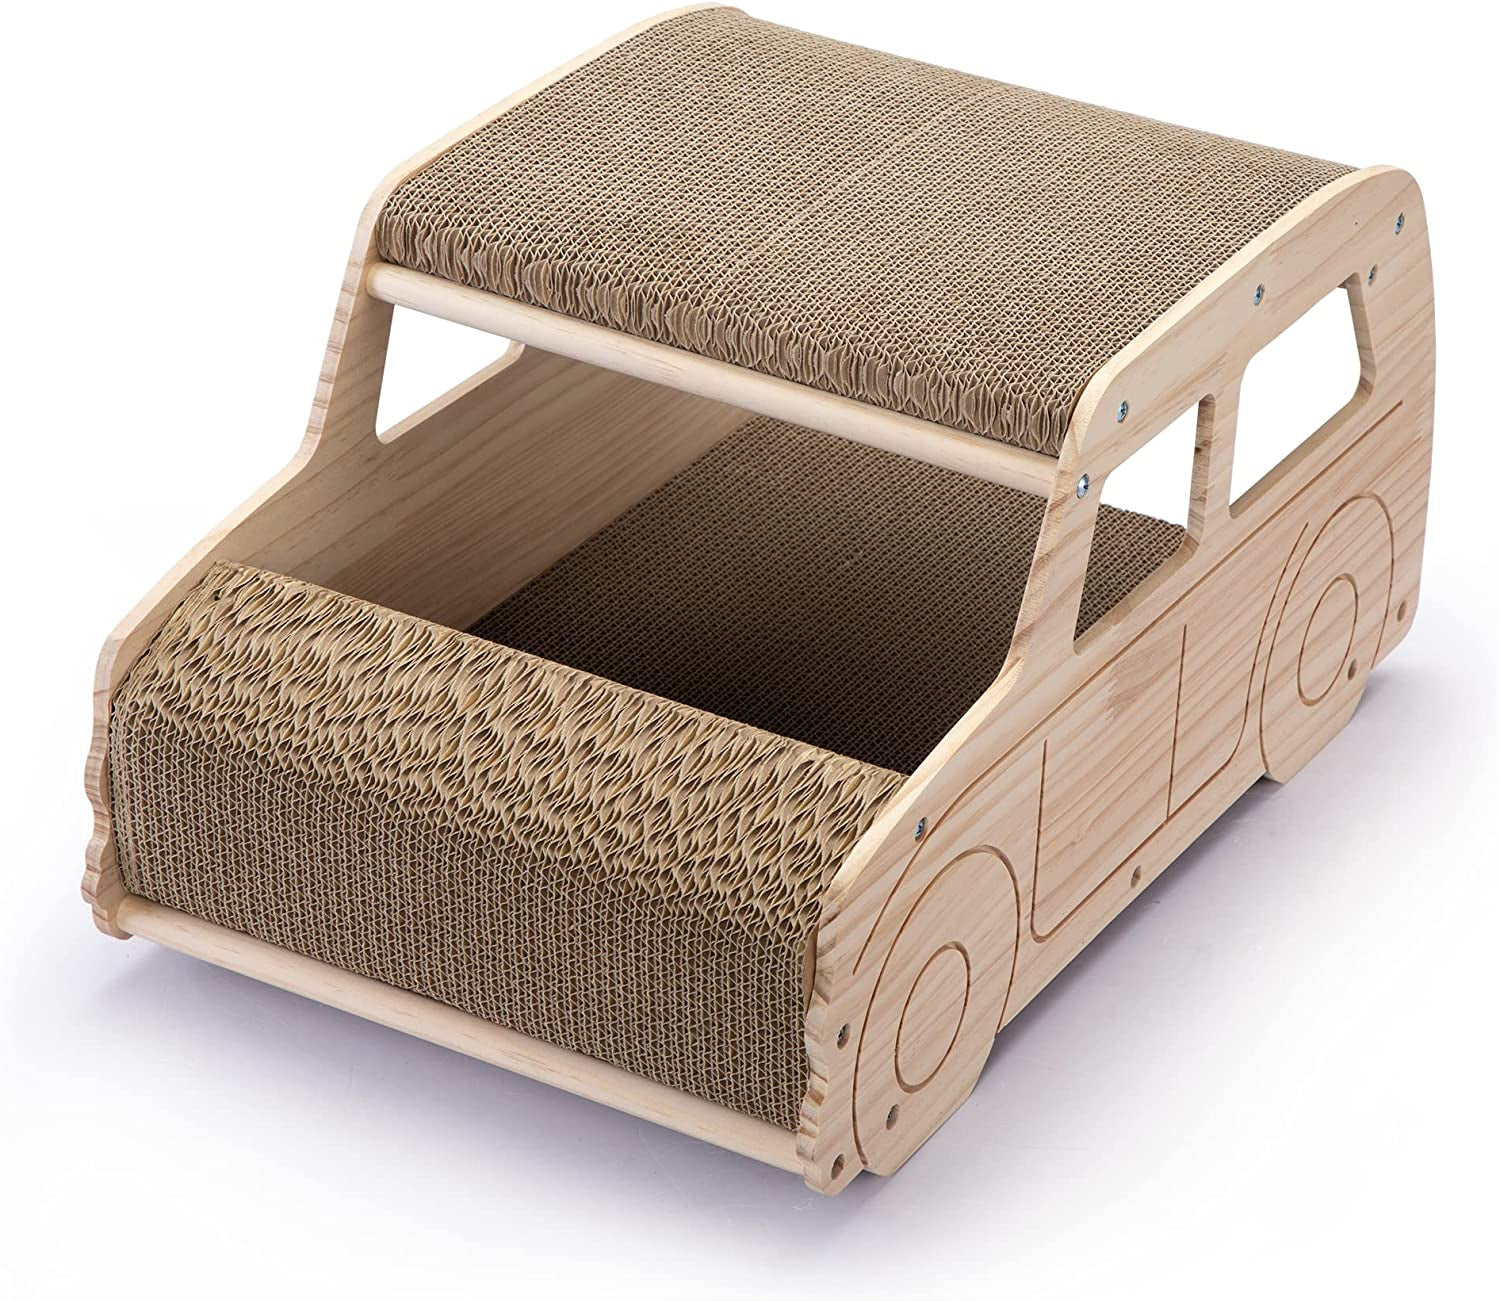 SHICHENG Wooden Cat Scratcher Lounge/Cardboard Car-Shaped Scratch, Play, Perch Cat Bed Couch for House Play Meanwhile Protect for Furniture Friendly Toy